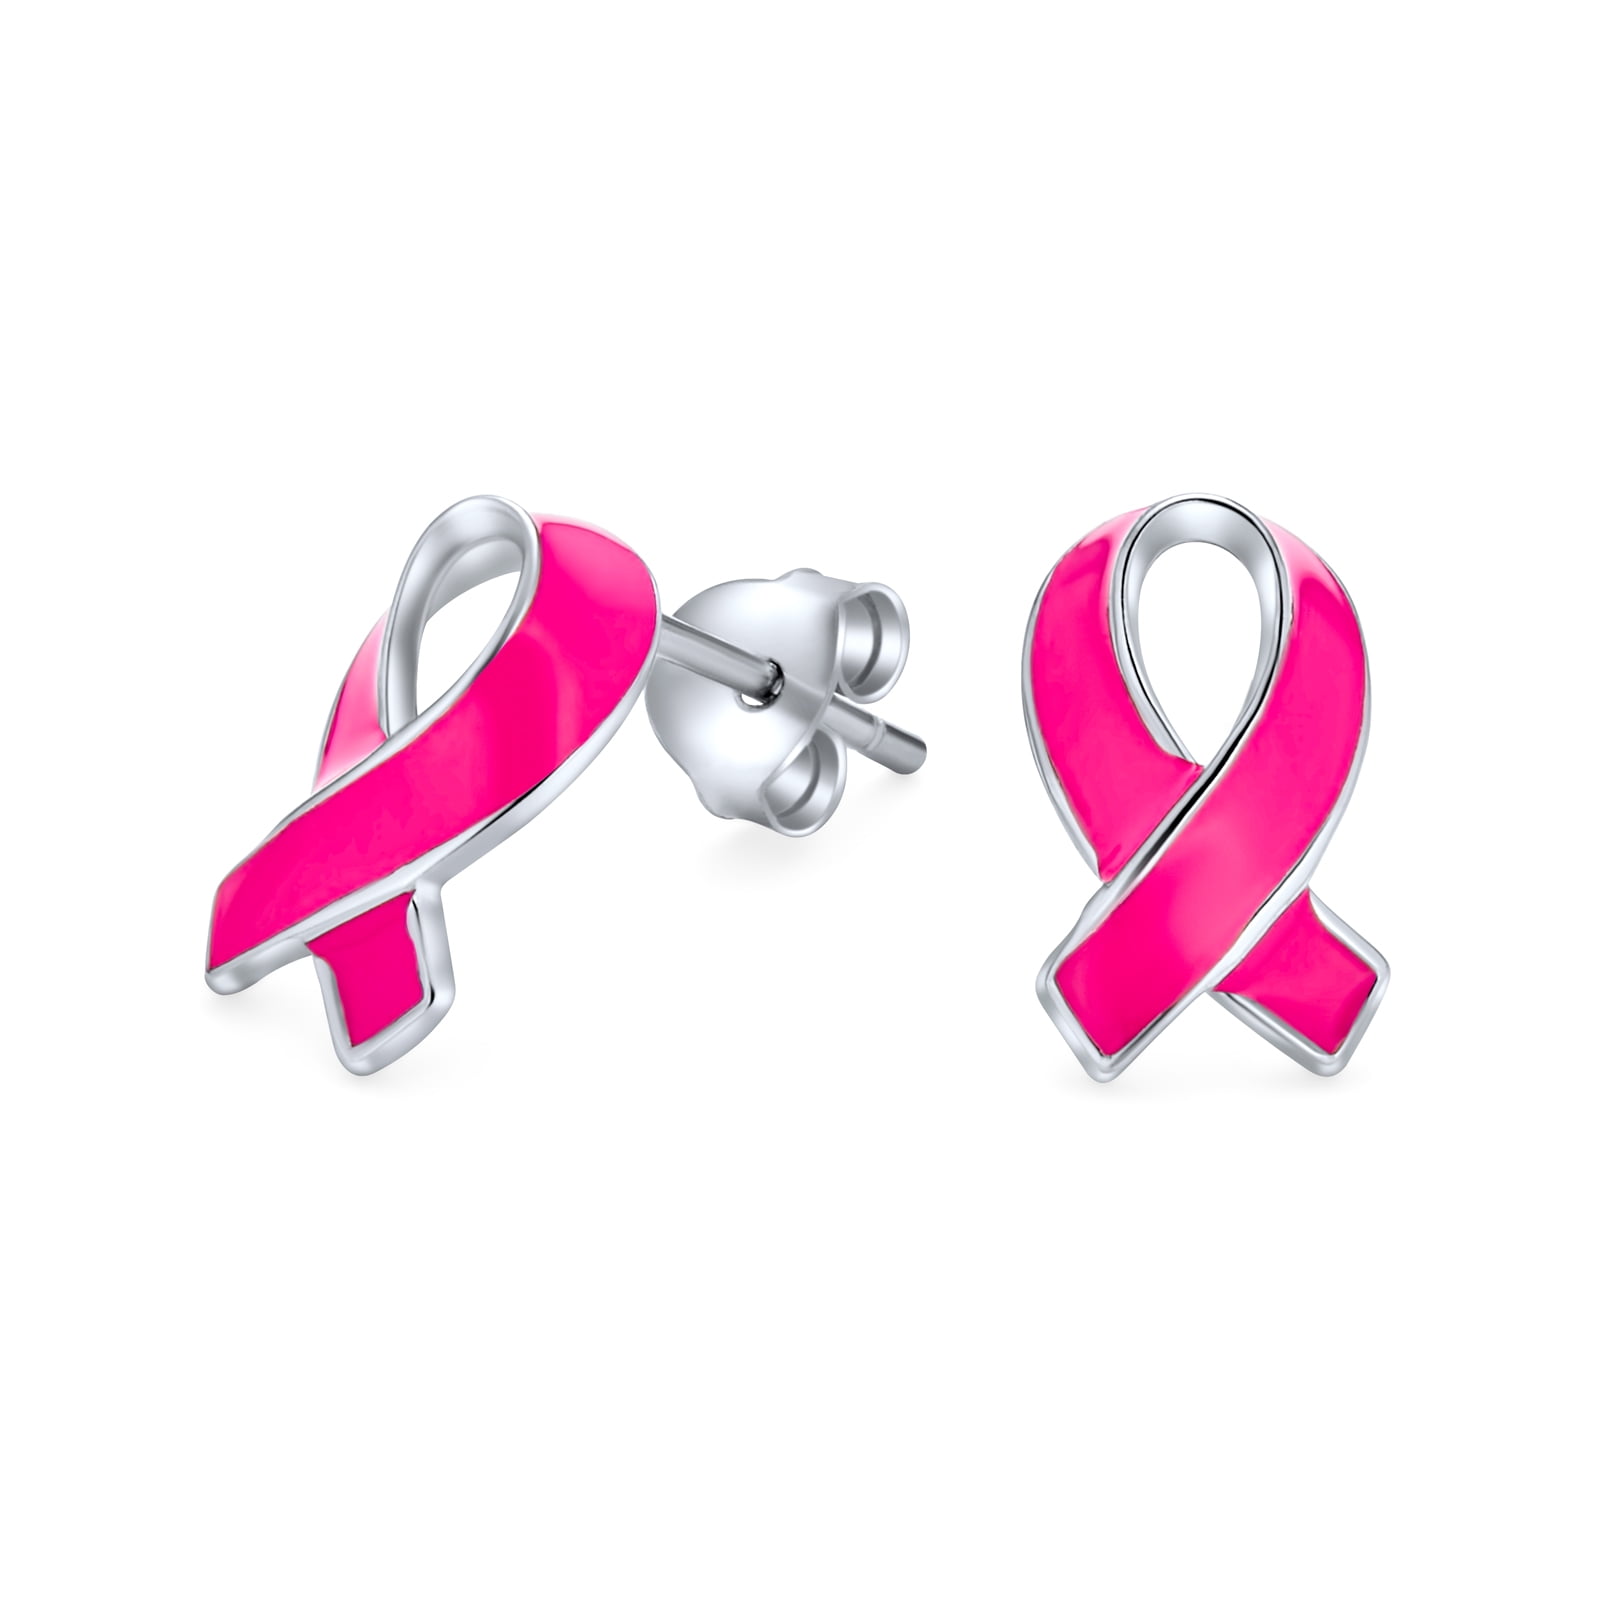 Breast Cancer Awareness Pink Ribbon Enamel Earrings with Free Shipping by Magical Fire